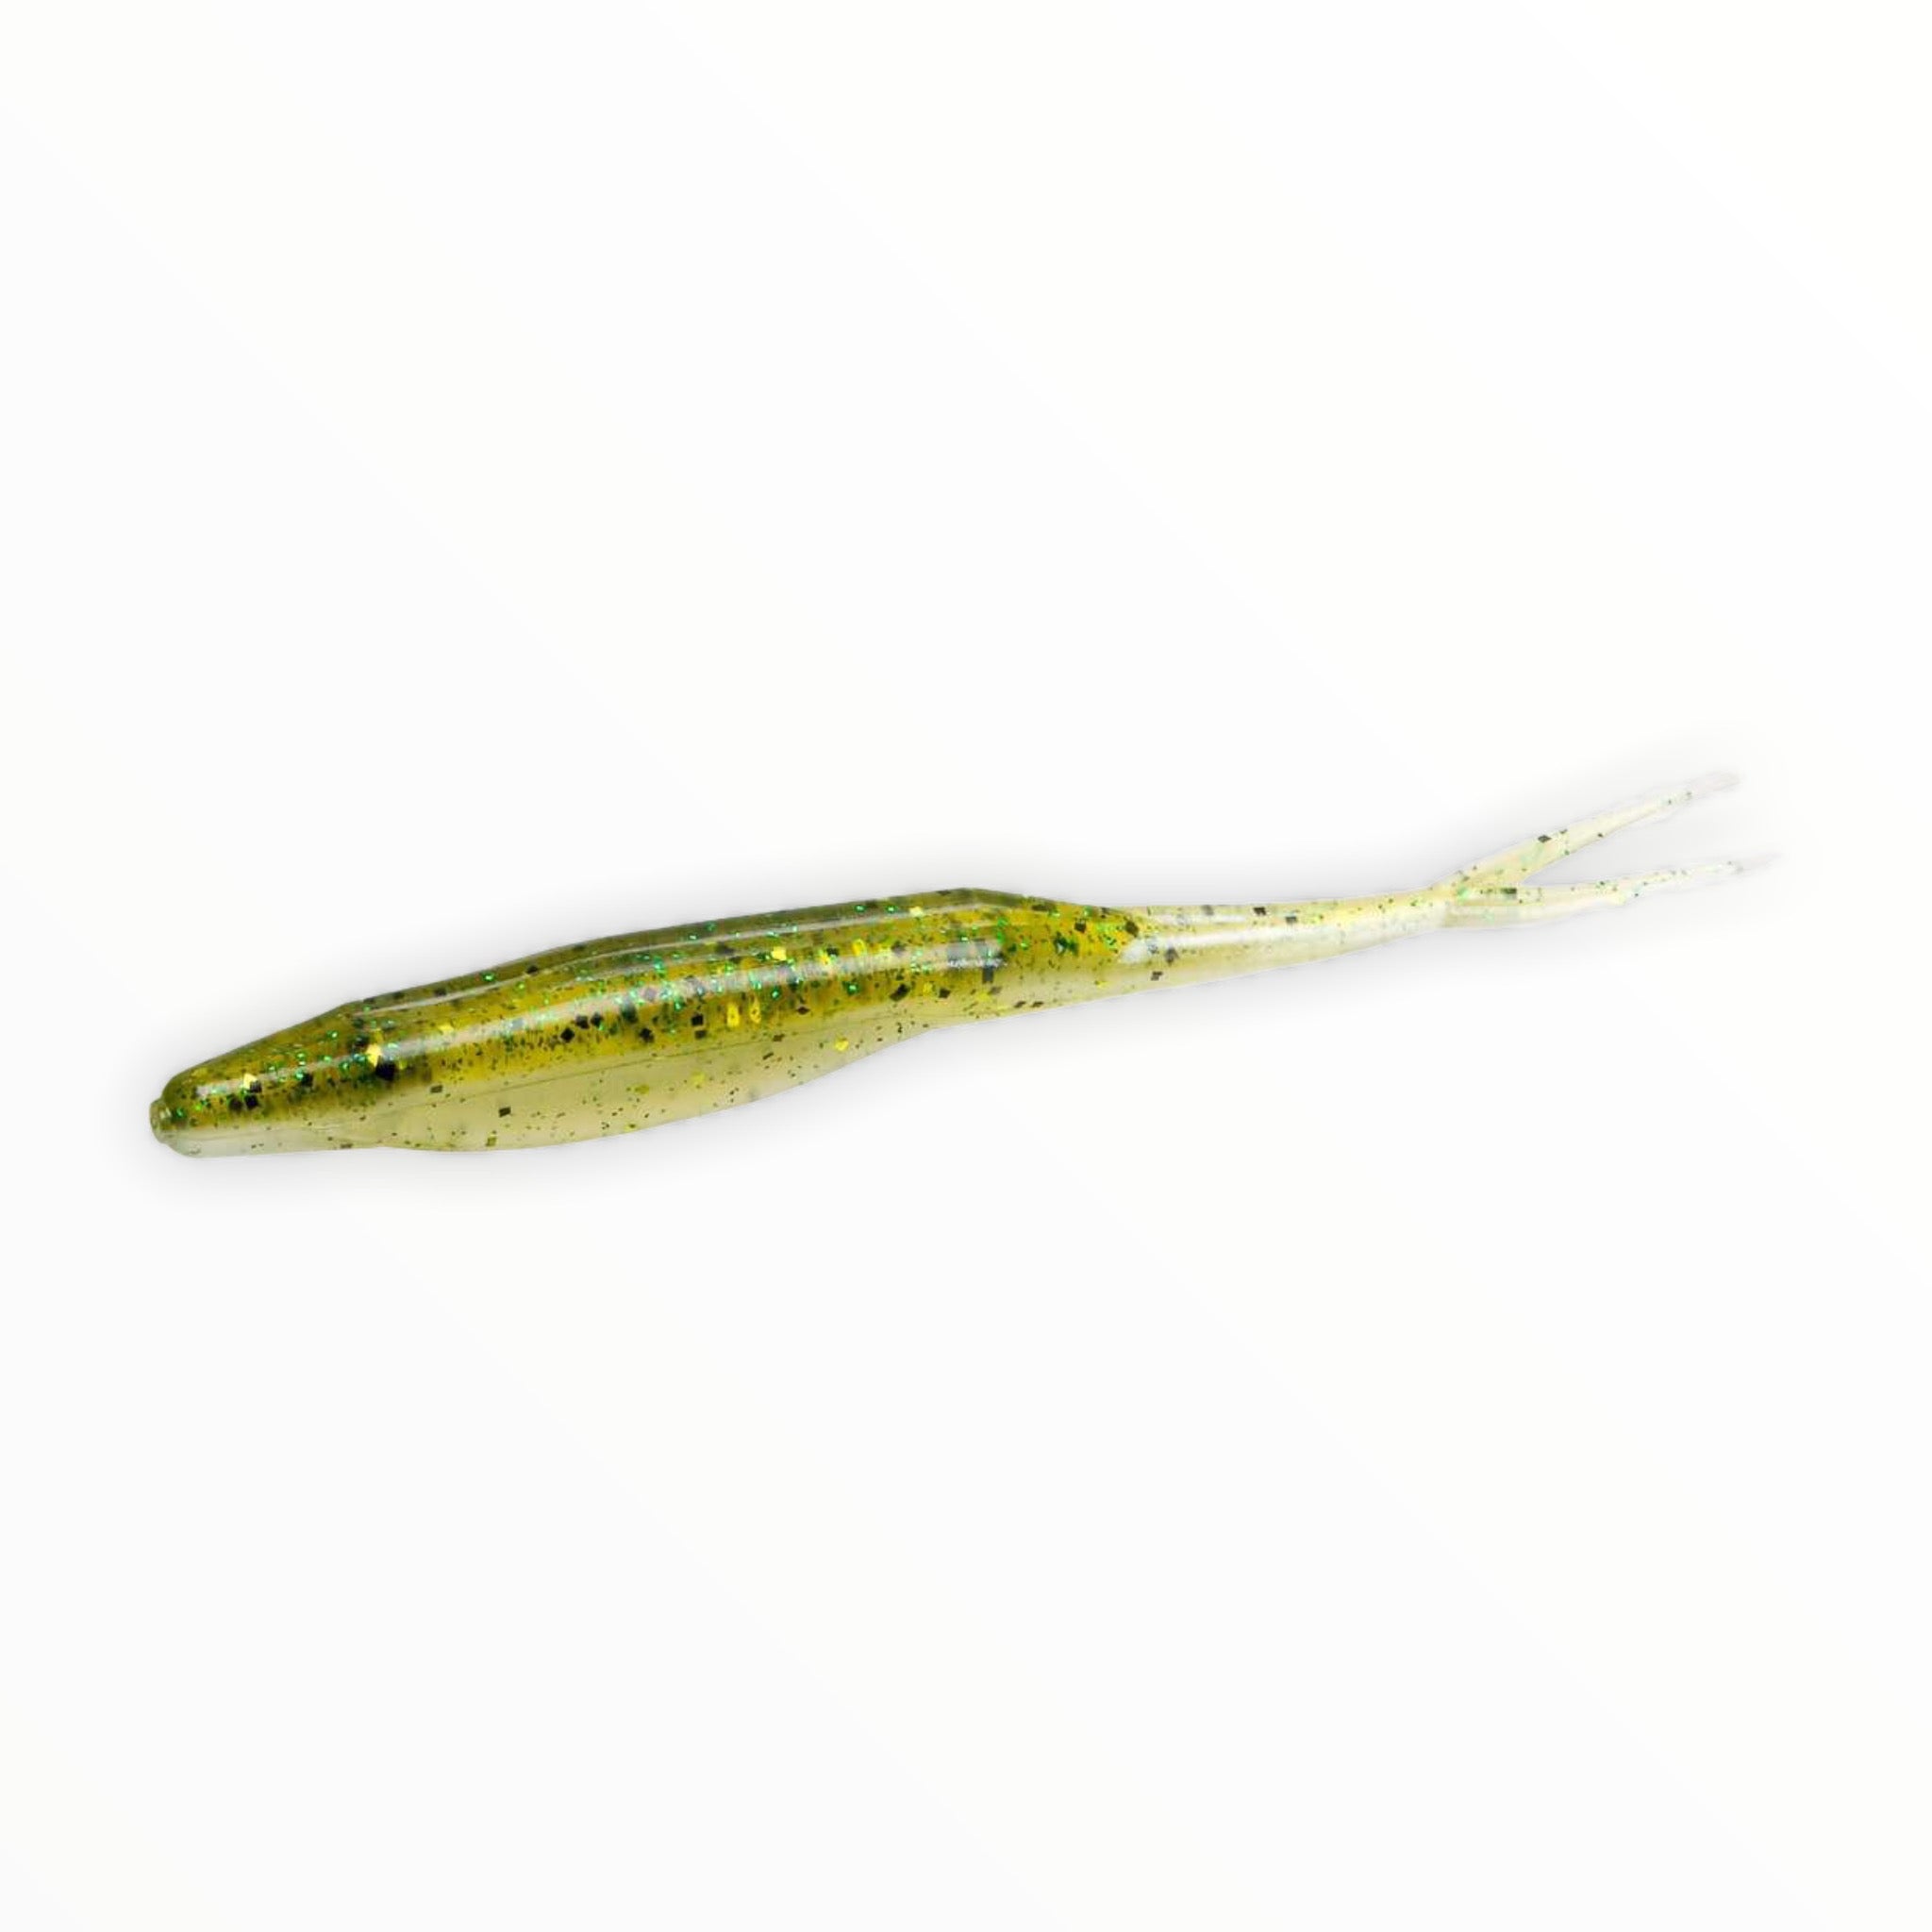 TheTime 110mm/14g Floating Jerkbait Minnow Fishing Lures Tungsten Weight  System Wobblers Blank Lure Unpainted Bait For Bass Pike